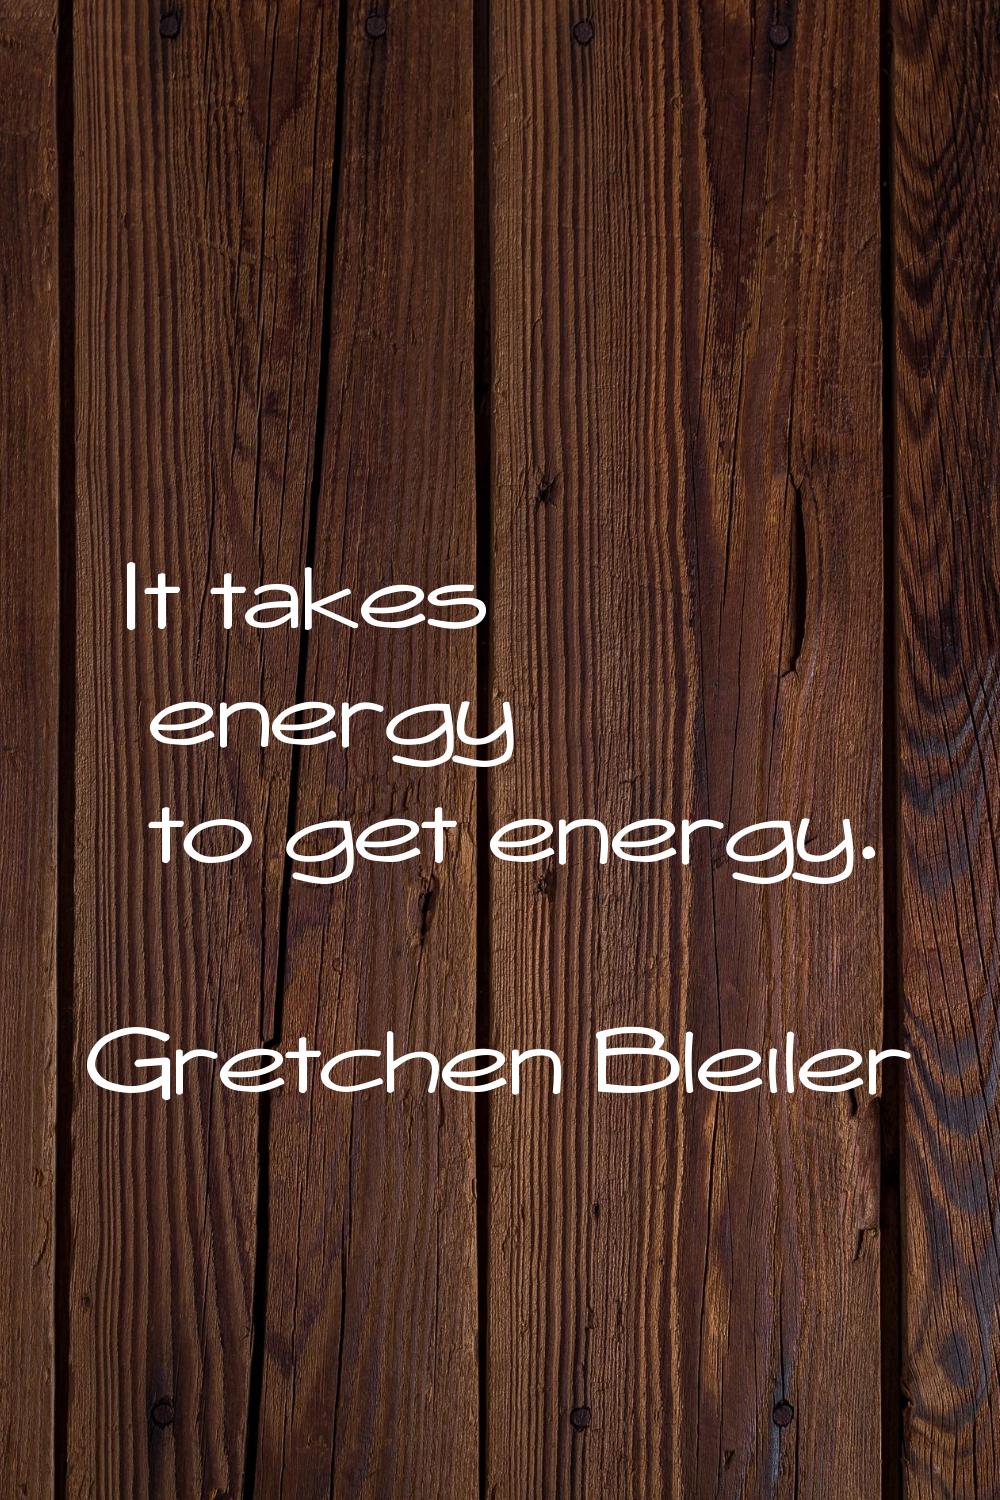 It takes energy to get energy.